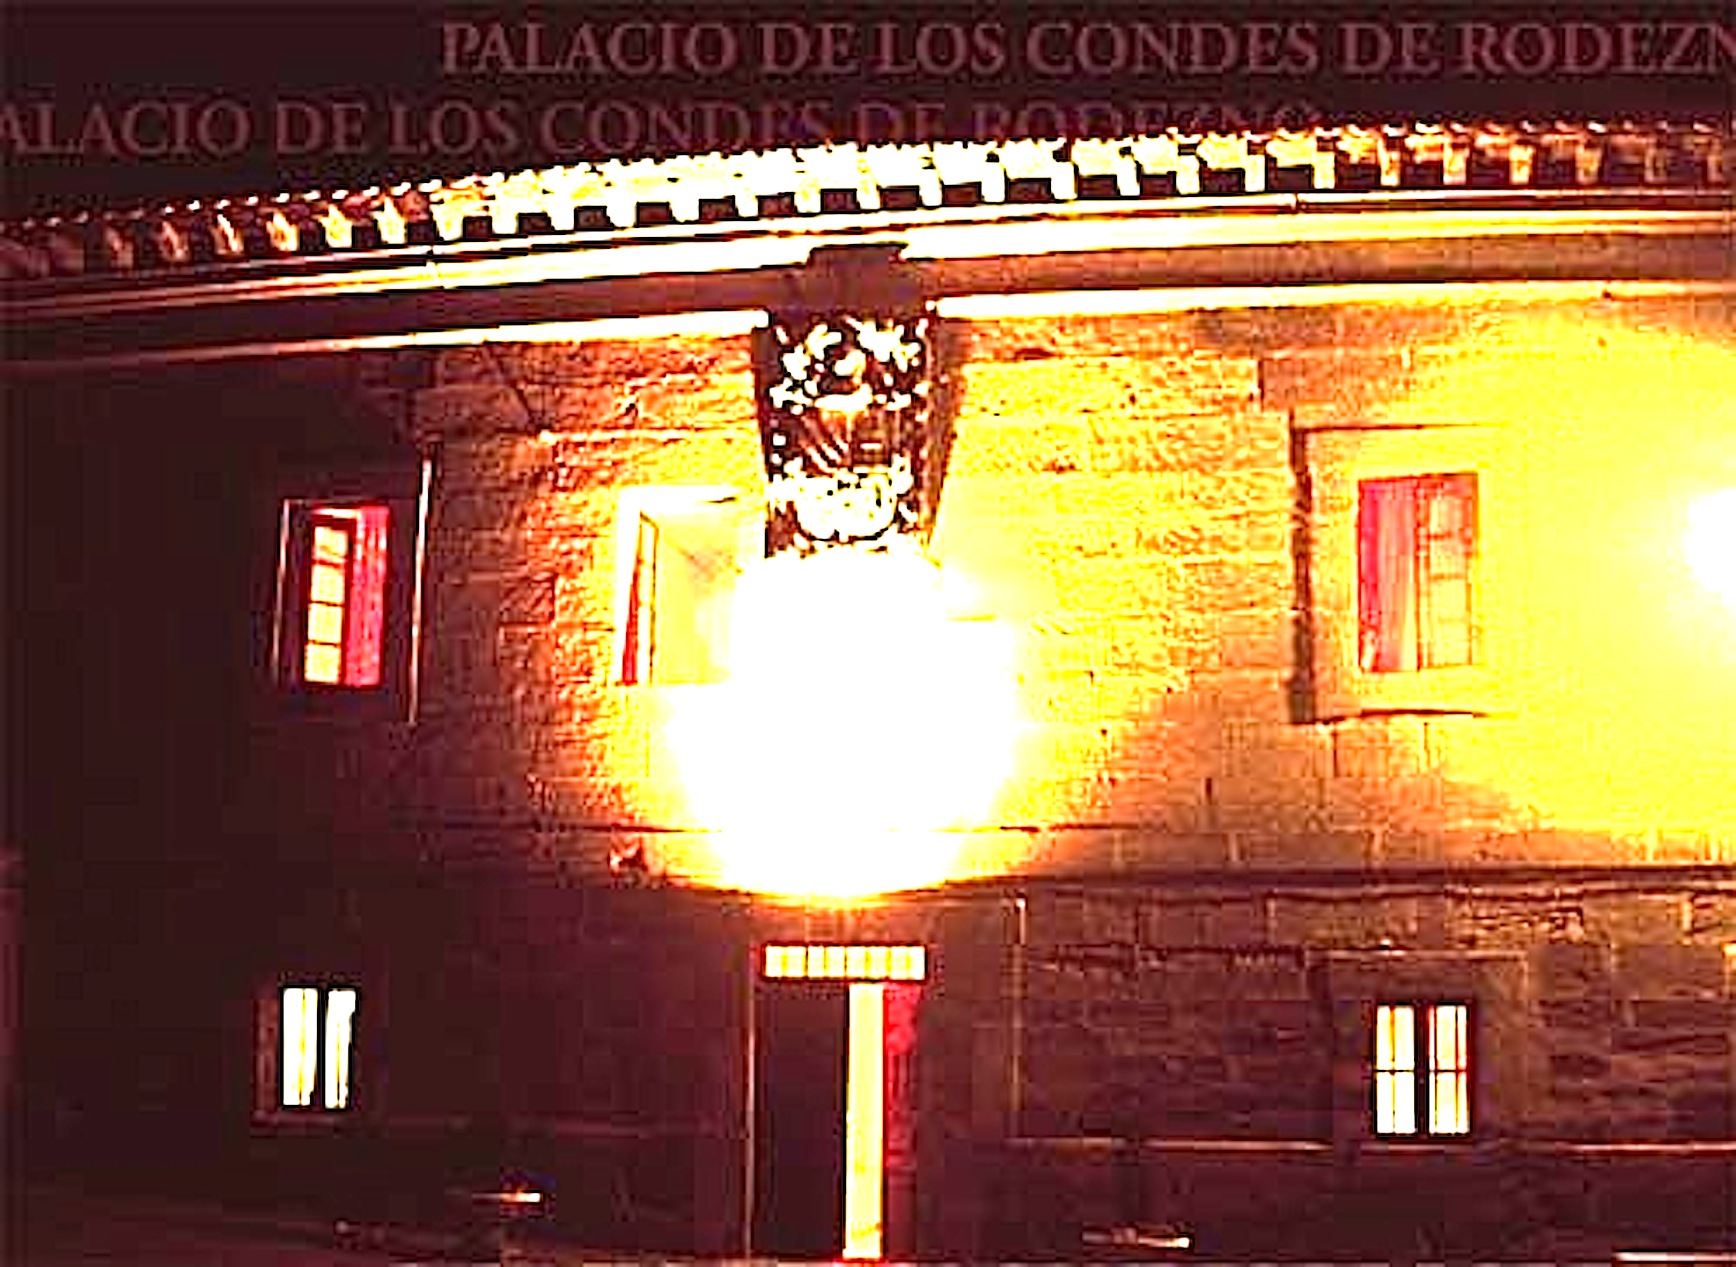 Palace of the Counts of Rodezno